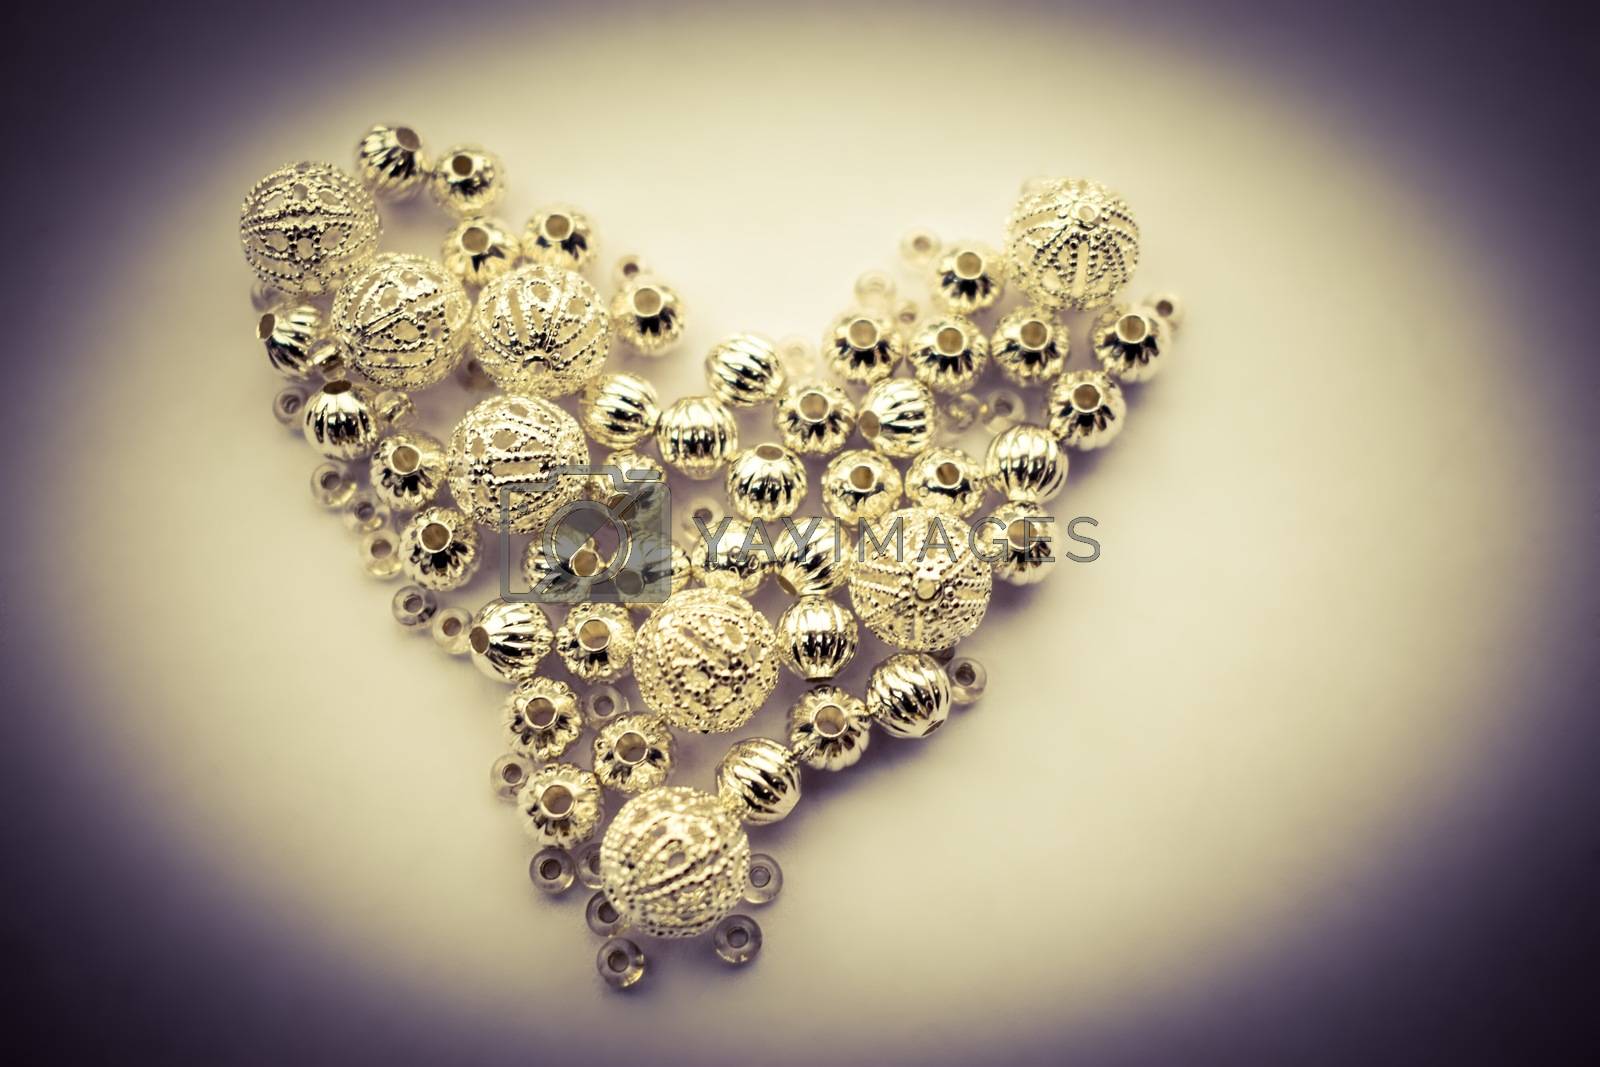 Royalty free image of selection of different silver beads shaped into a heart by sarahdavies576@gmail.com